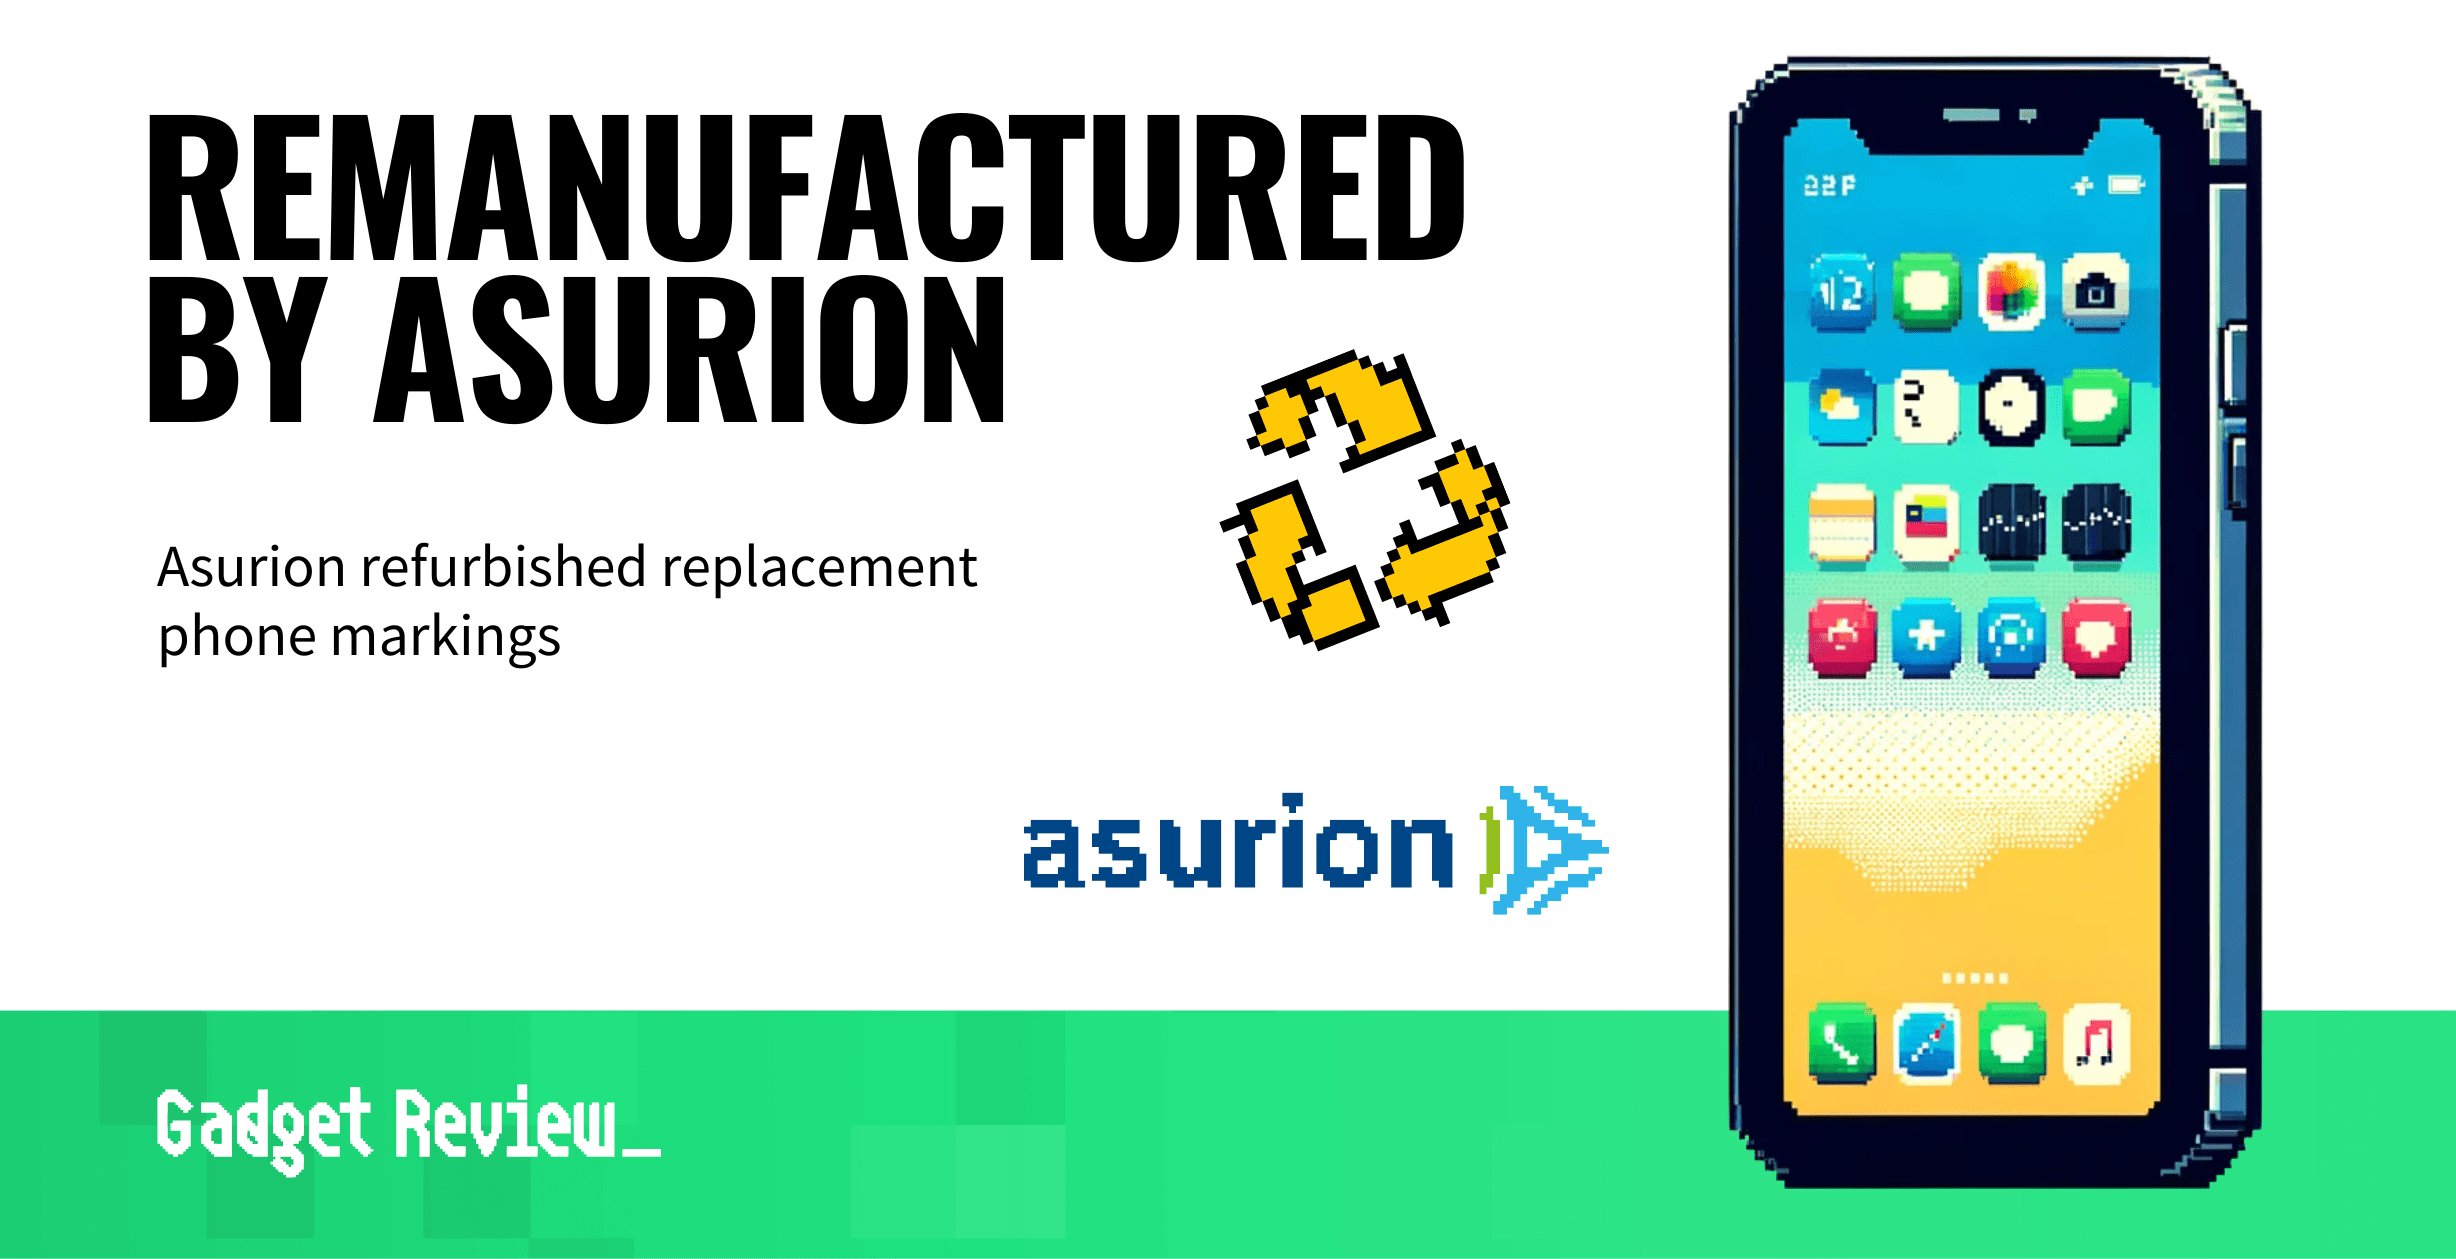 Remanufactured by Asurion – What Does it Mean?